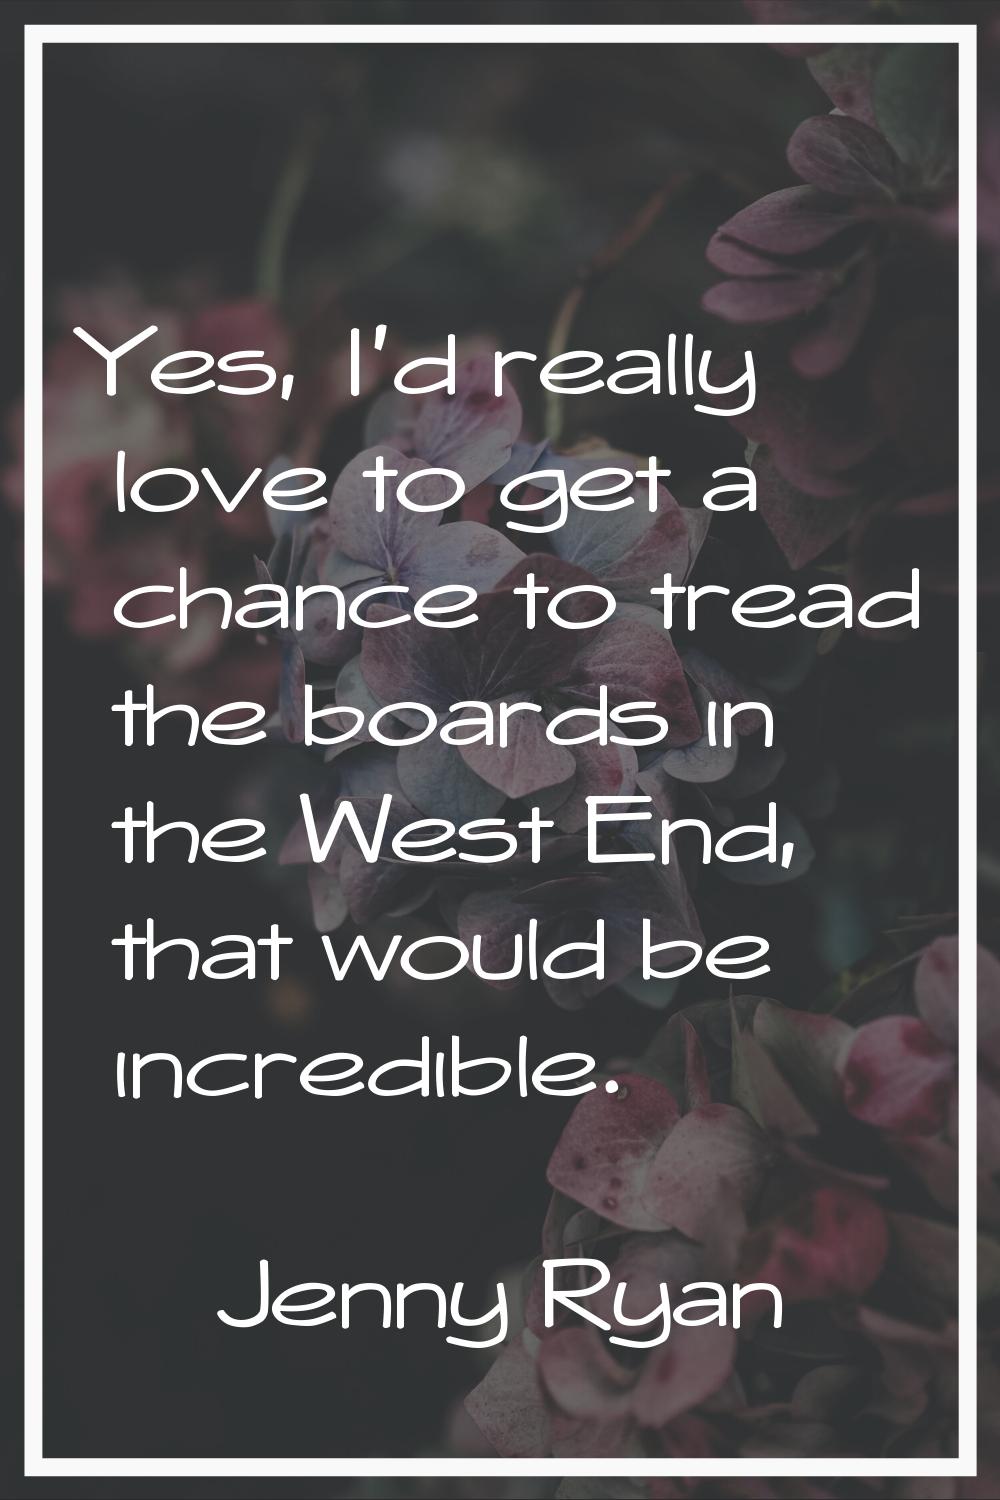 Yes, I'd really love to get a chance to tread the boards in the West End, that would be incredible.